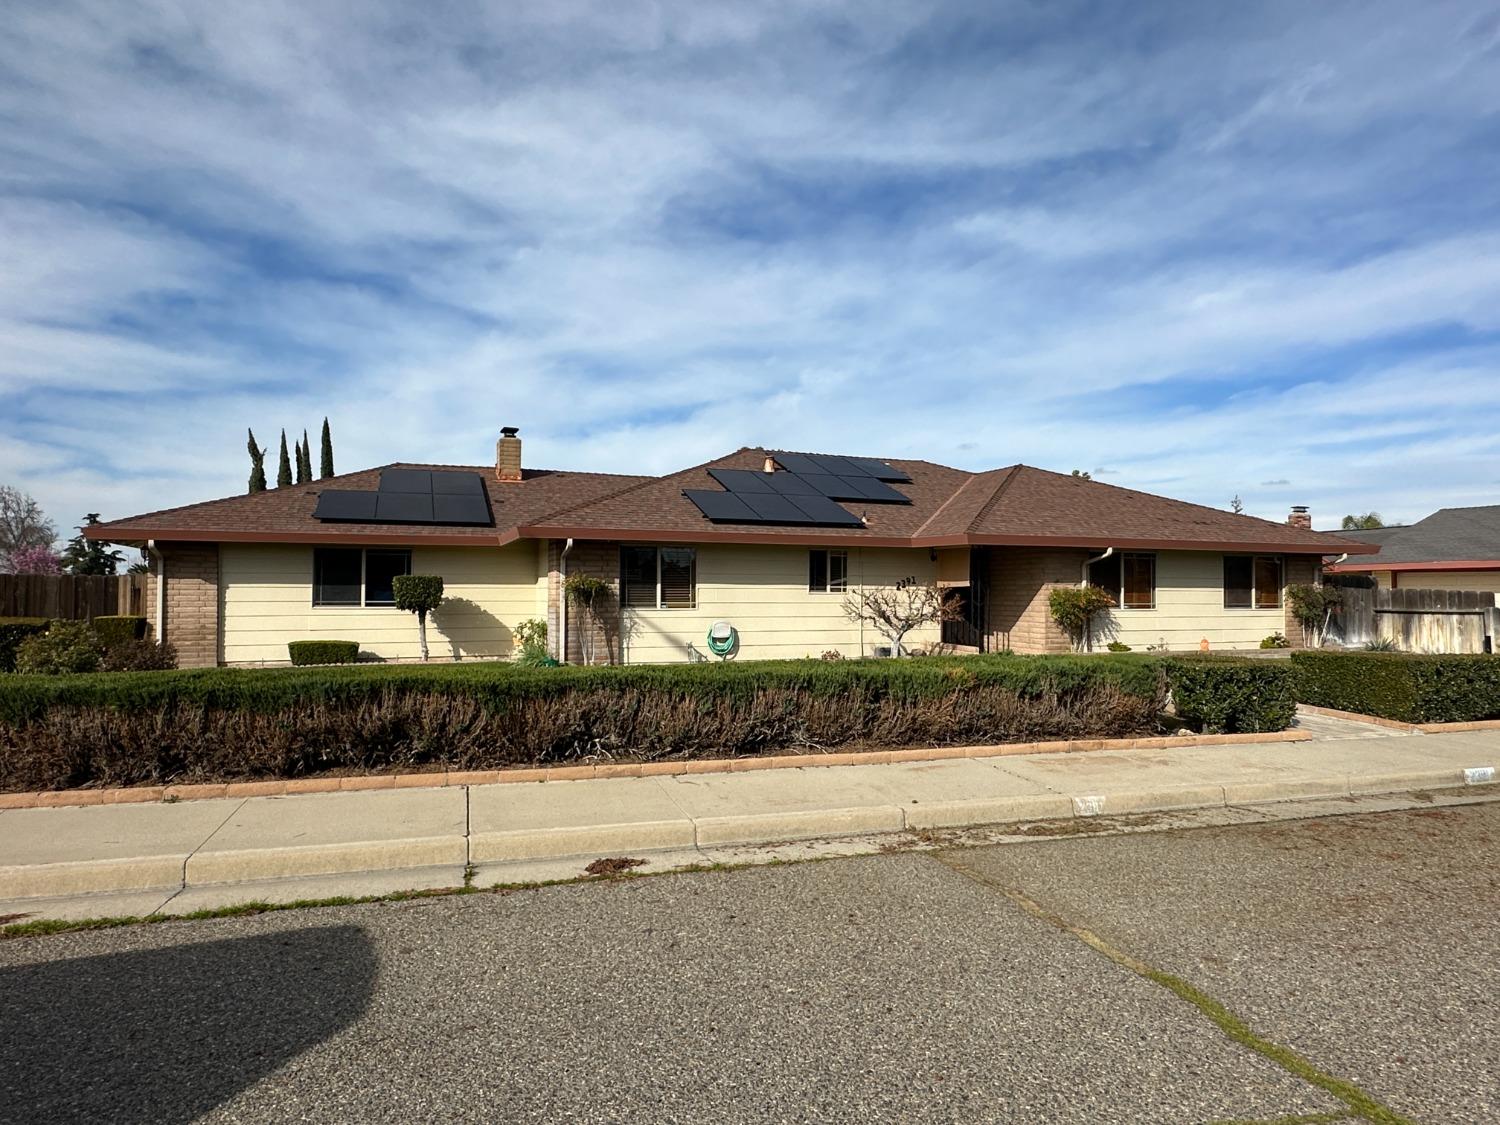 Photo of 2391 Suncrest St in Atwater, CA